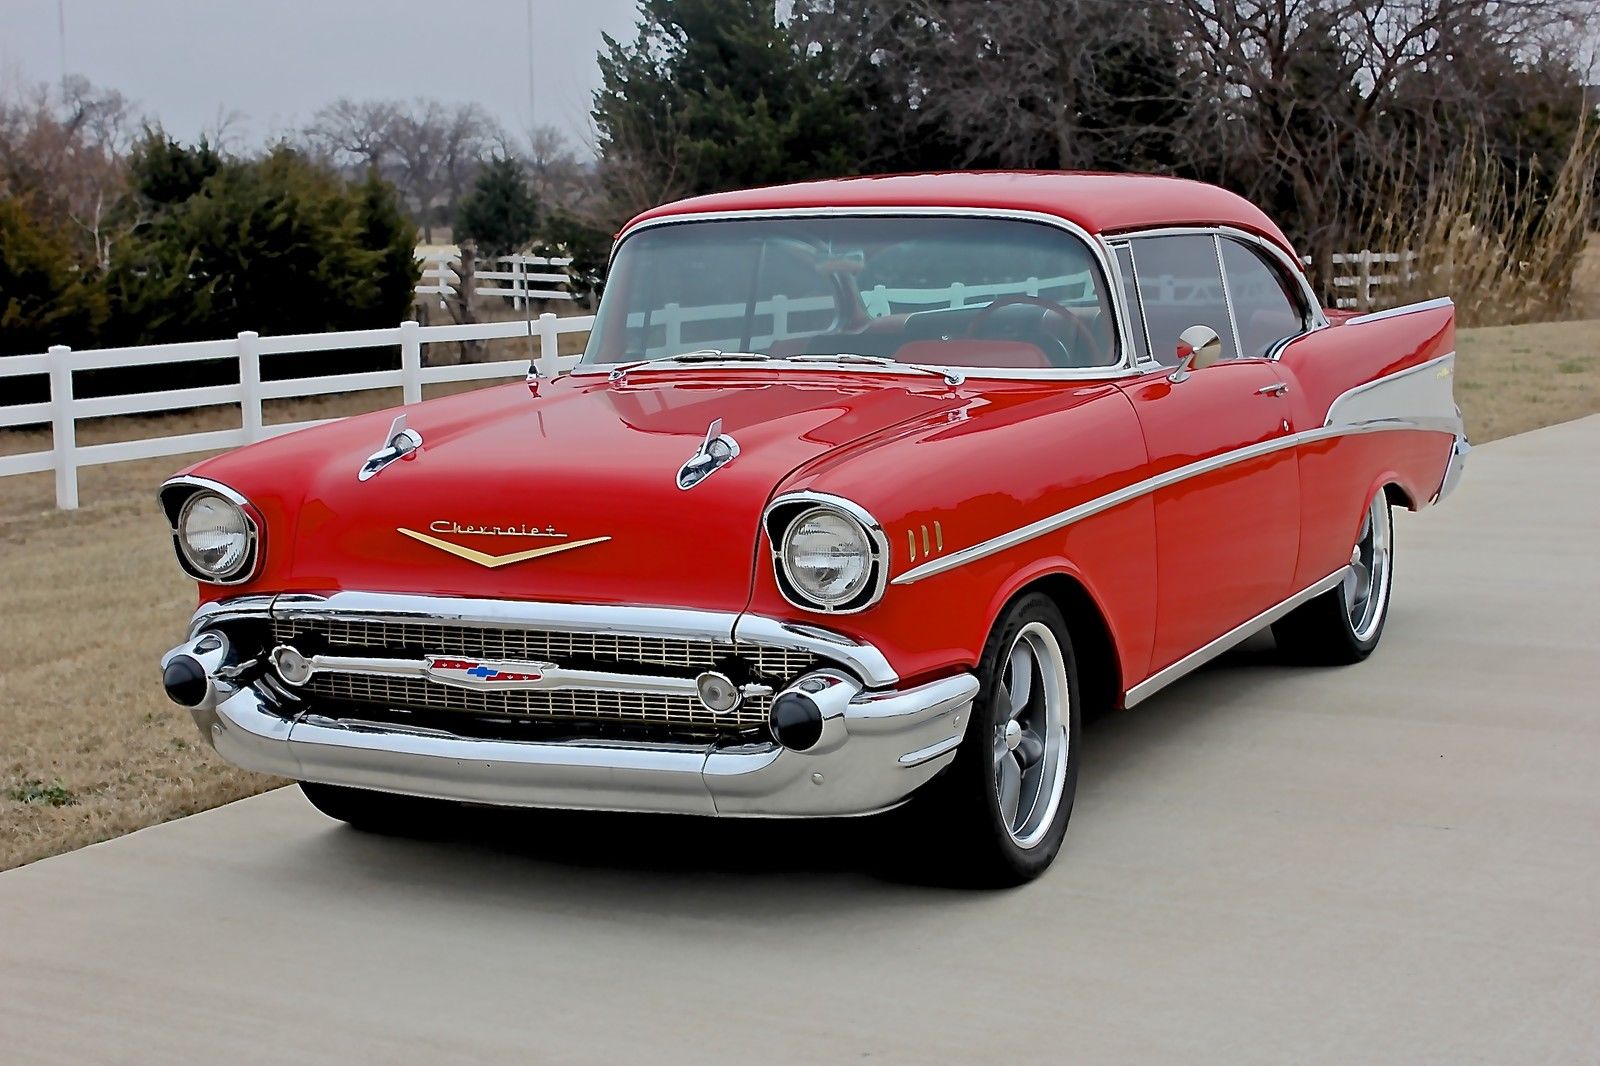 57 Chevy Bel Air For Sale In California